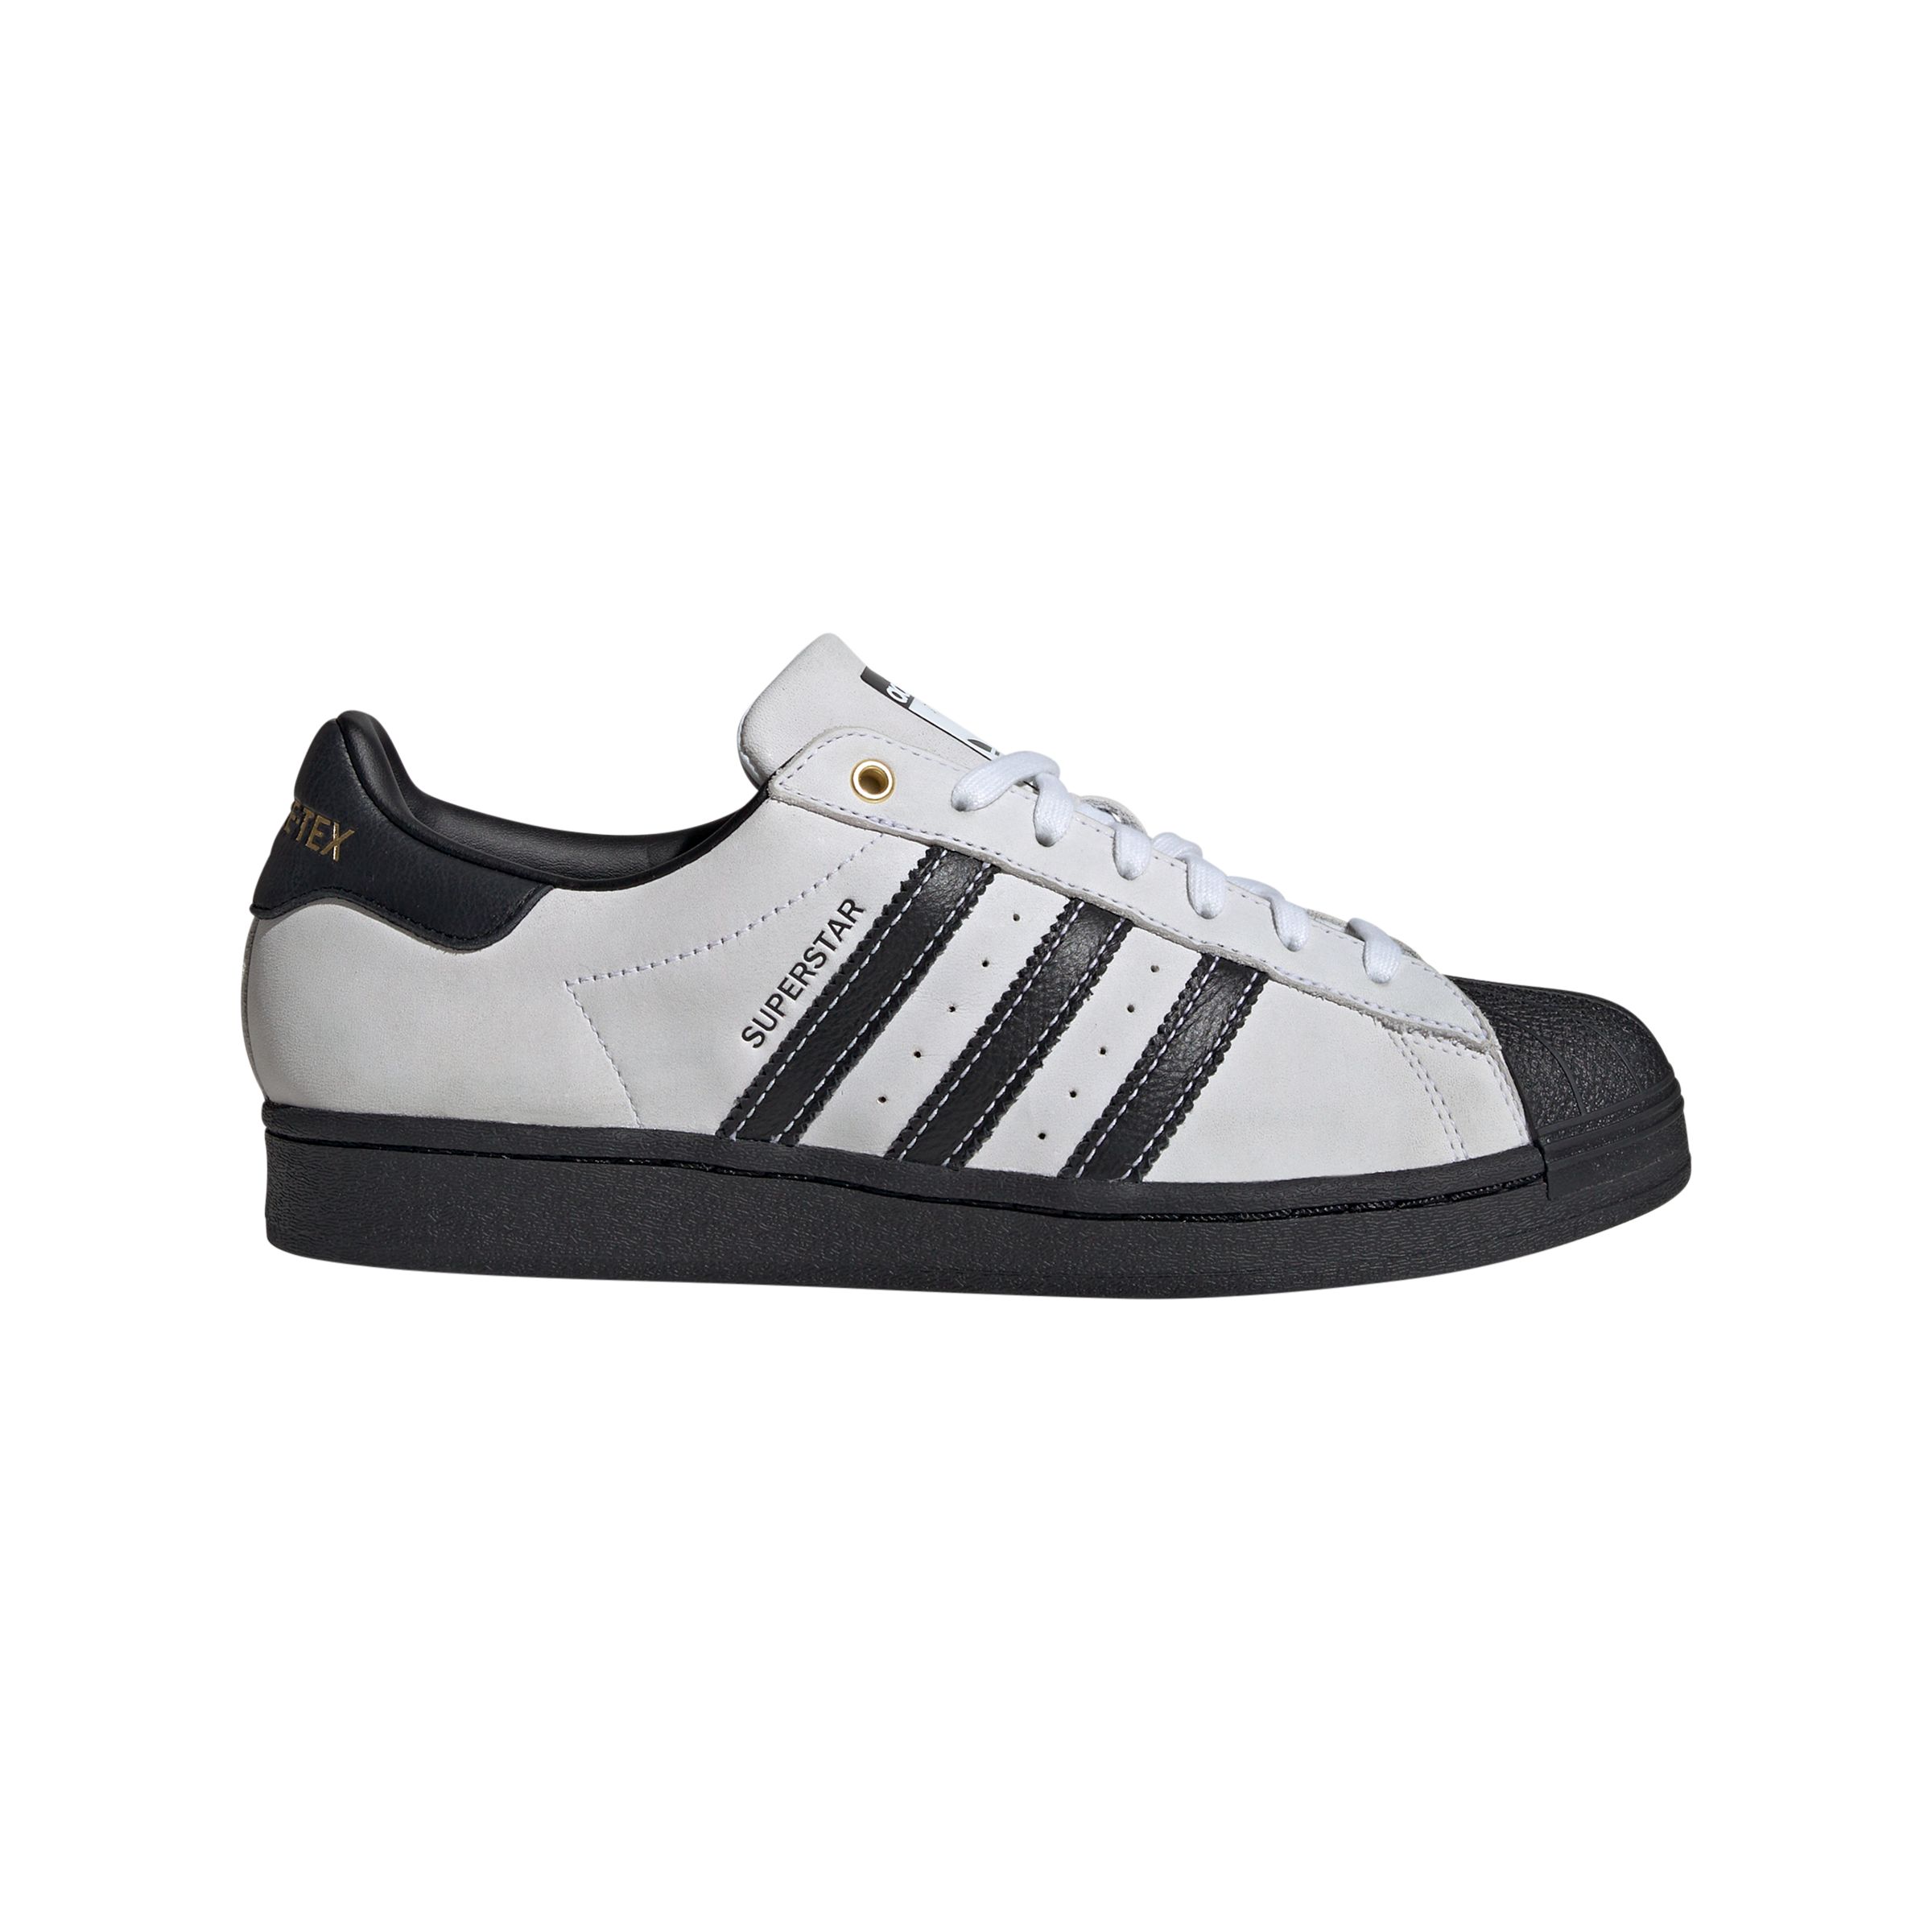 Image of adidas Men's Superstar Gore-Tex Shoes